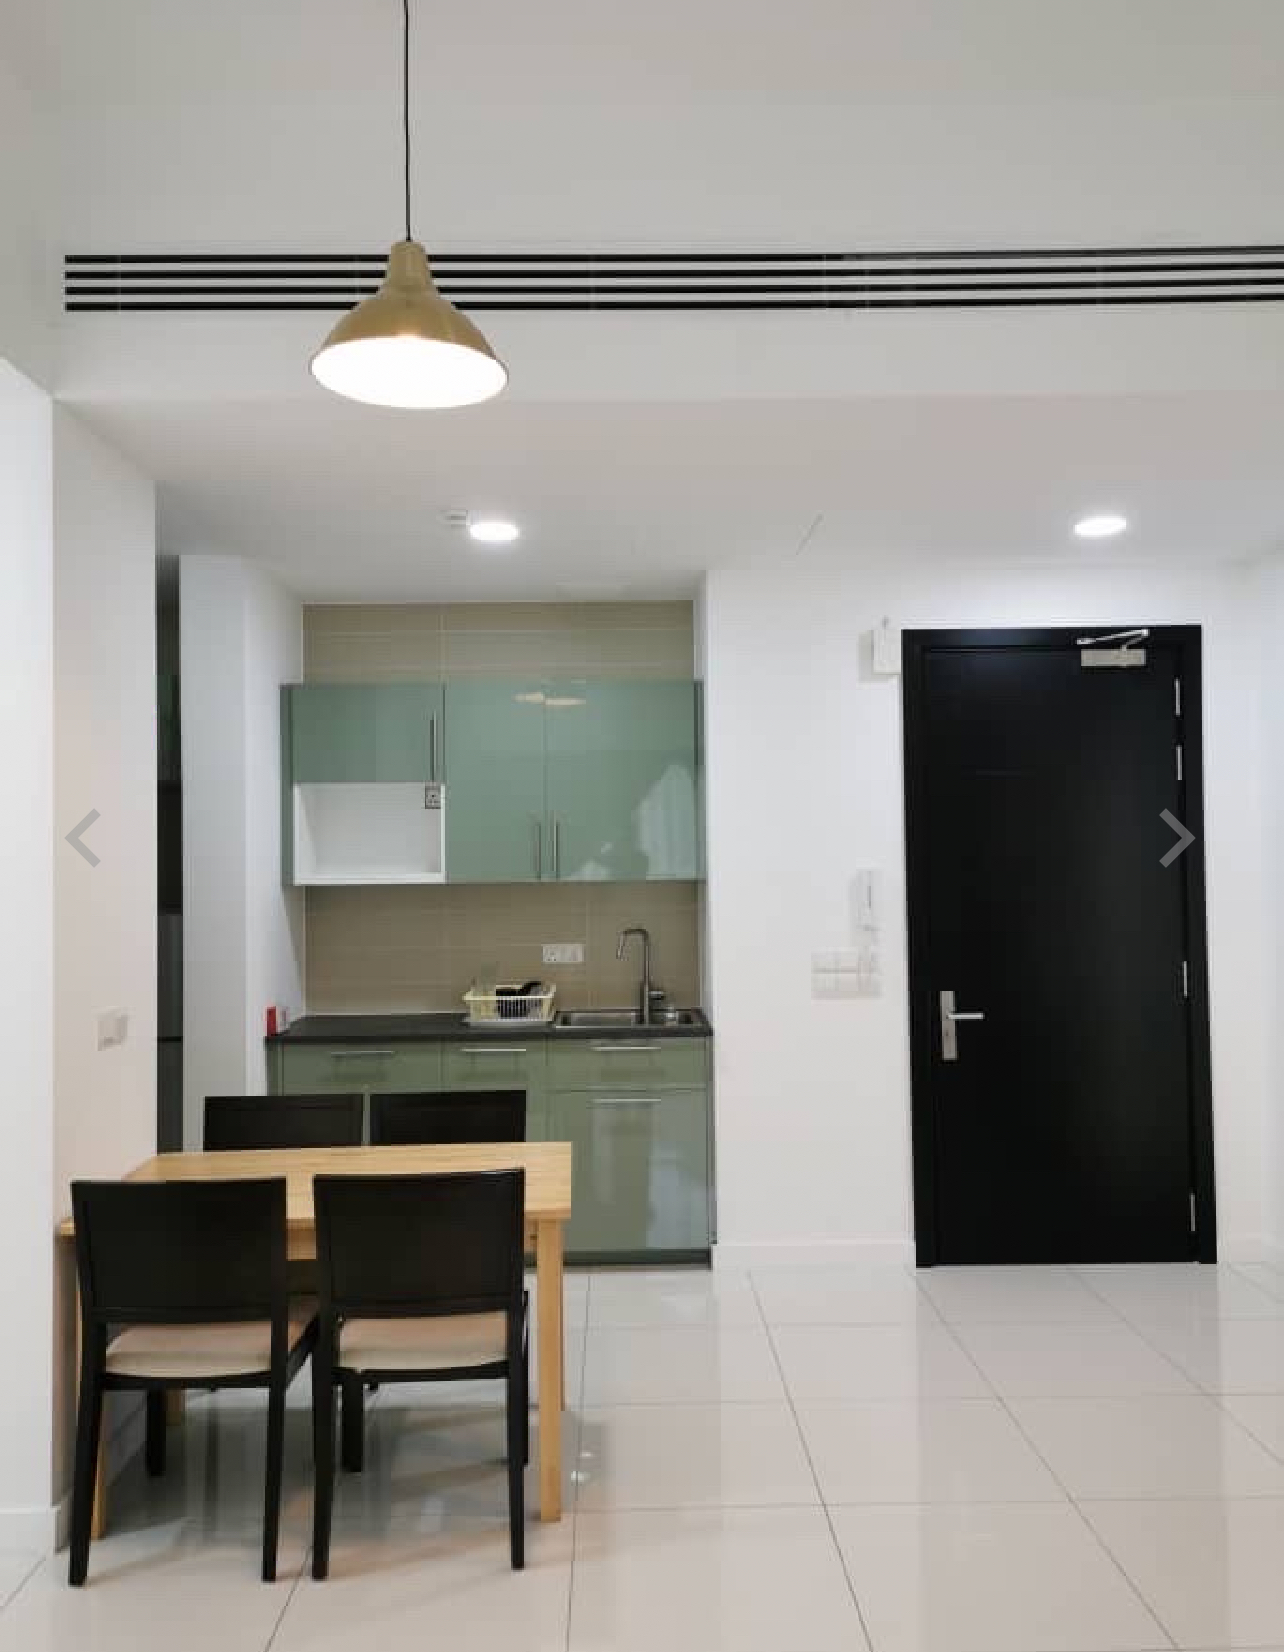 room for rent, studio, muara tabuan light industrial park, Send the owner a message on WhatsApp/facebook if you want to RENT the unit(Mohammed Nhat)&Telegram(@muhammednhat101)